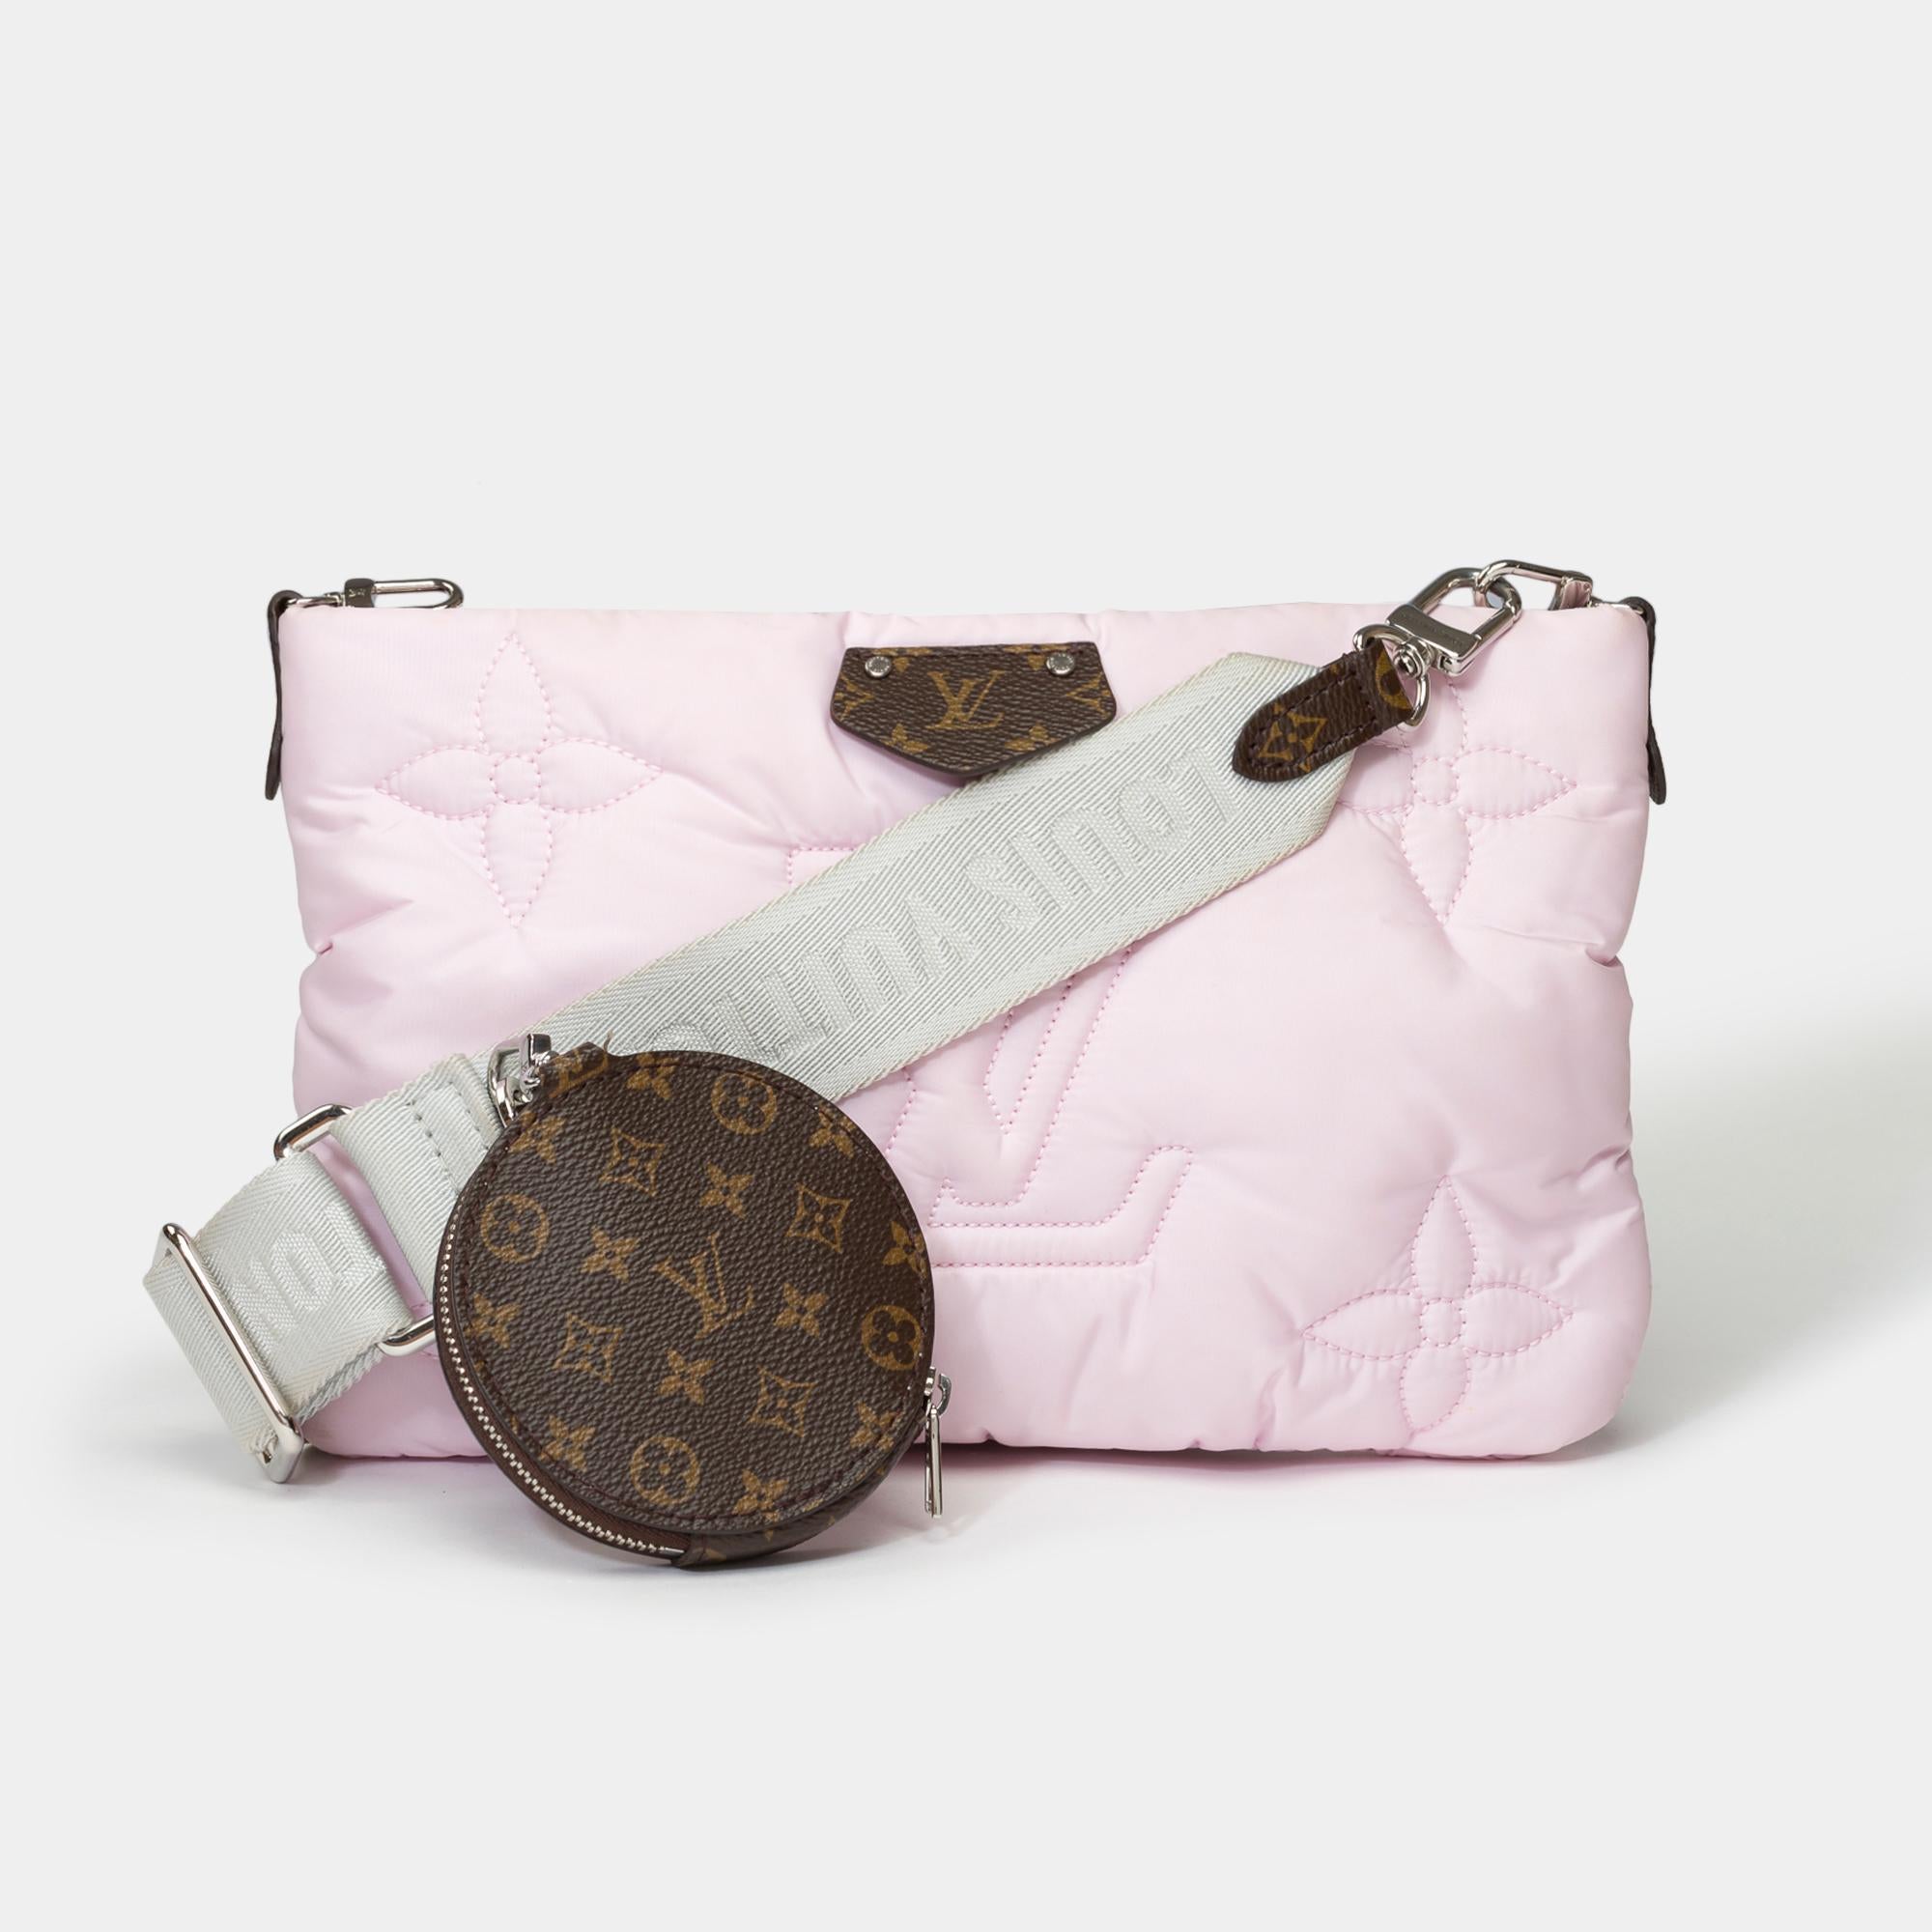 Made​ ​of​ ​recycled​ ​nylon​ ​in​ ​Pink,​ ​the​ ​Accessory​ ​Pouch​ ​and​ ​its​ ​removable​ ​wallet​ ​belong​ ​to​ ​the​ ​LV​ ​Pillow​ ​capsule​ ​collection​ ​of​ ​the​ ​season.​ ​This​ ​playful​ ​piece​ ​offers​ ​many​ ​styling​ ​options:​ ​​ ​​